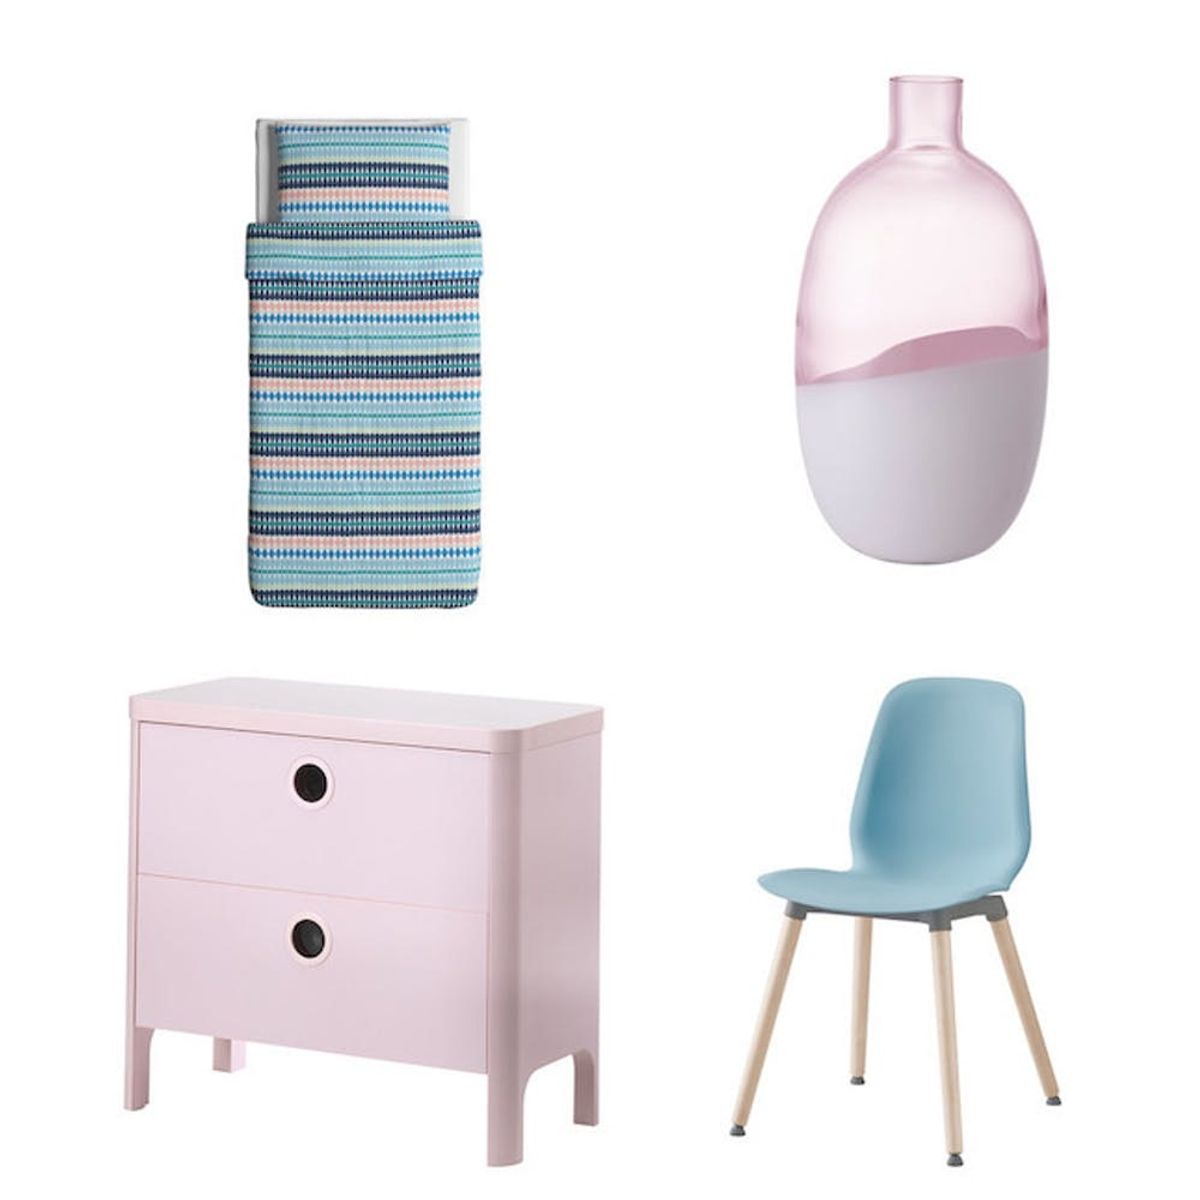 IKEA Is All Over Pantone’s New 2016 Colors